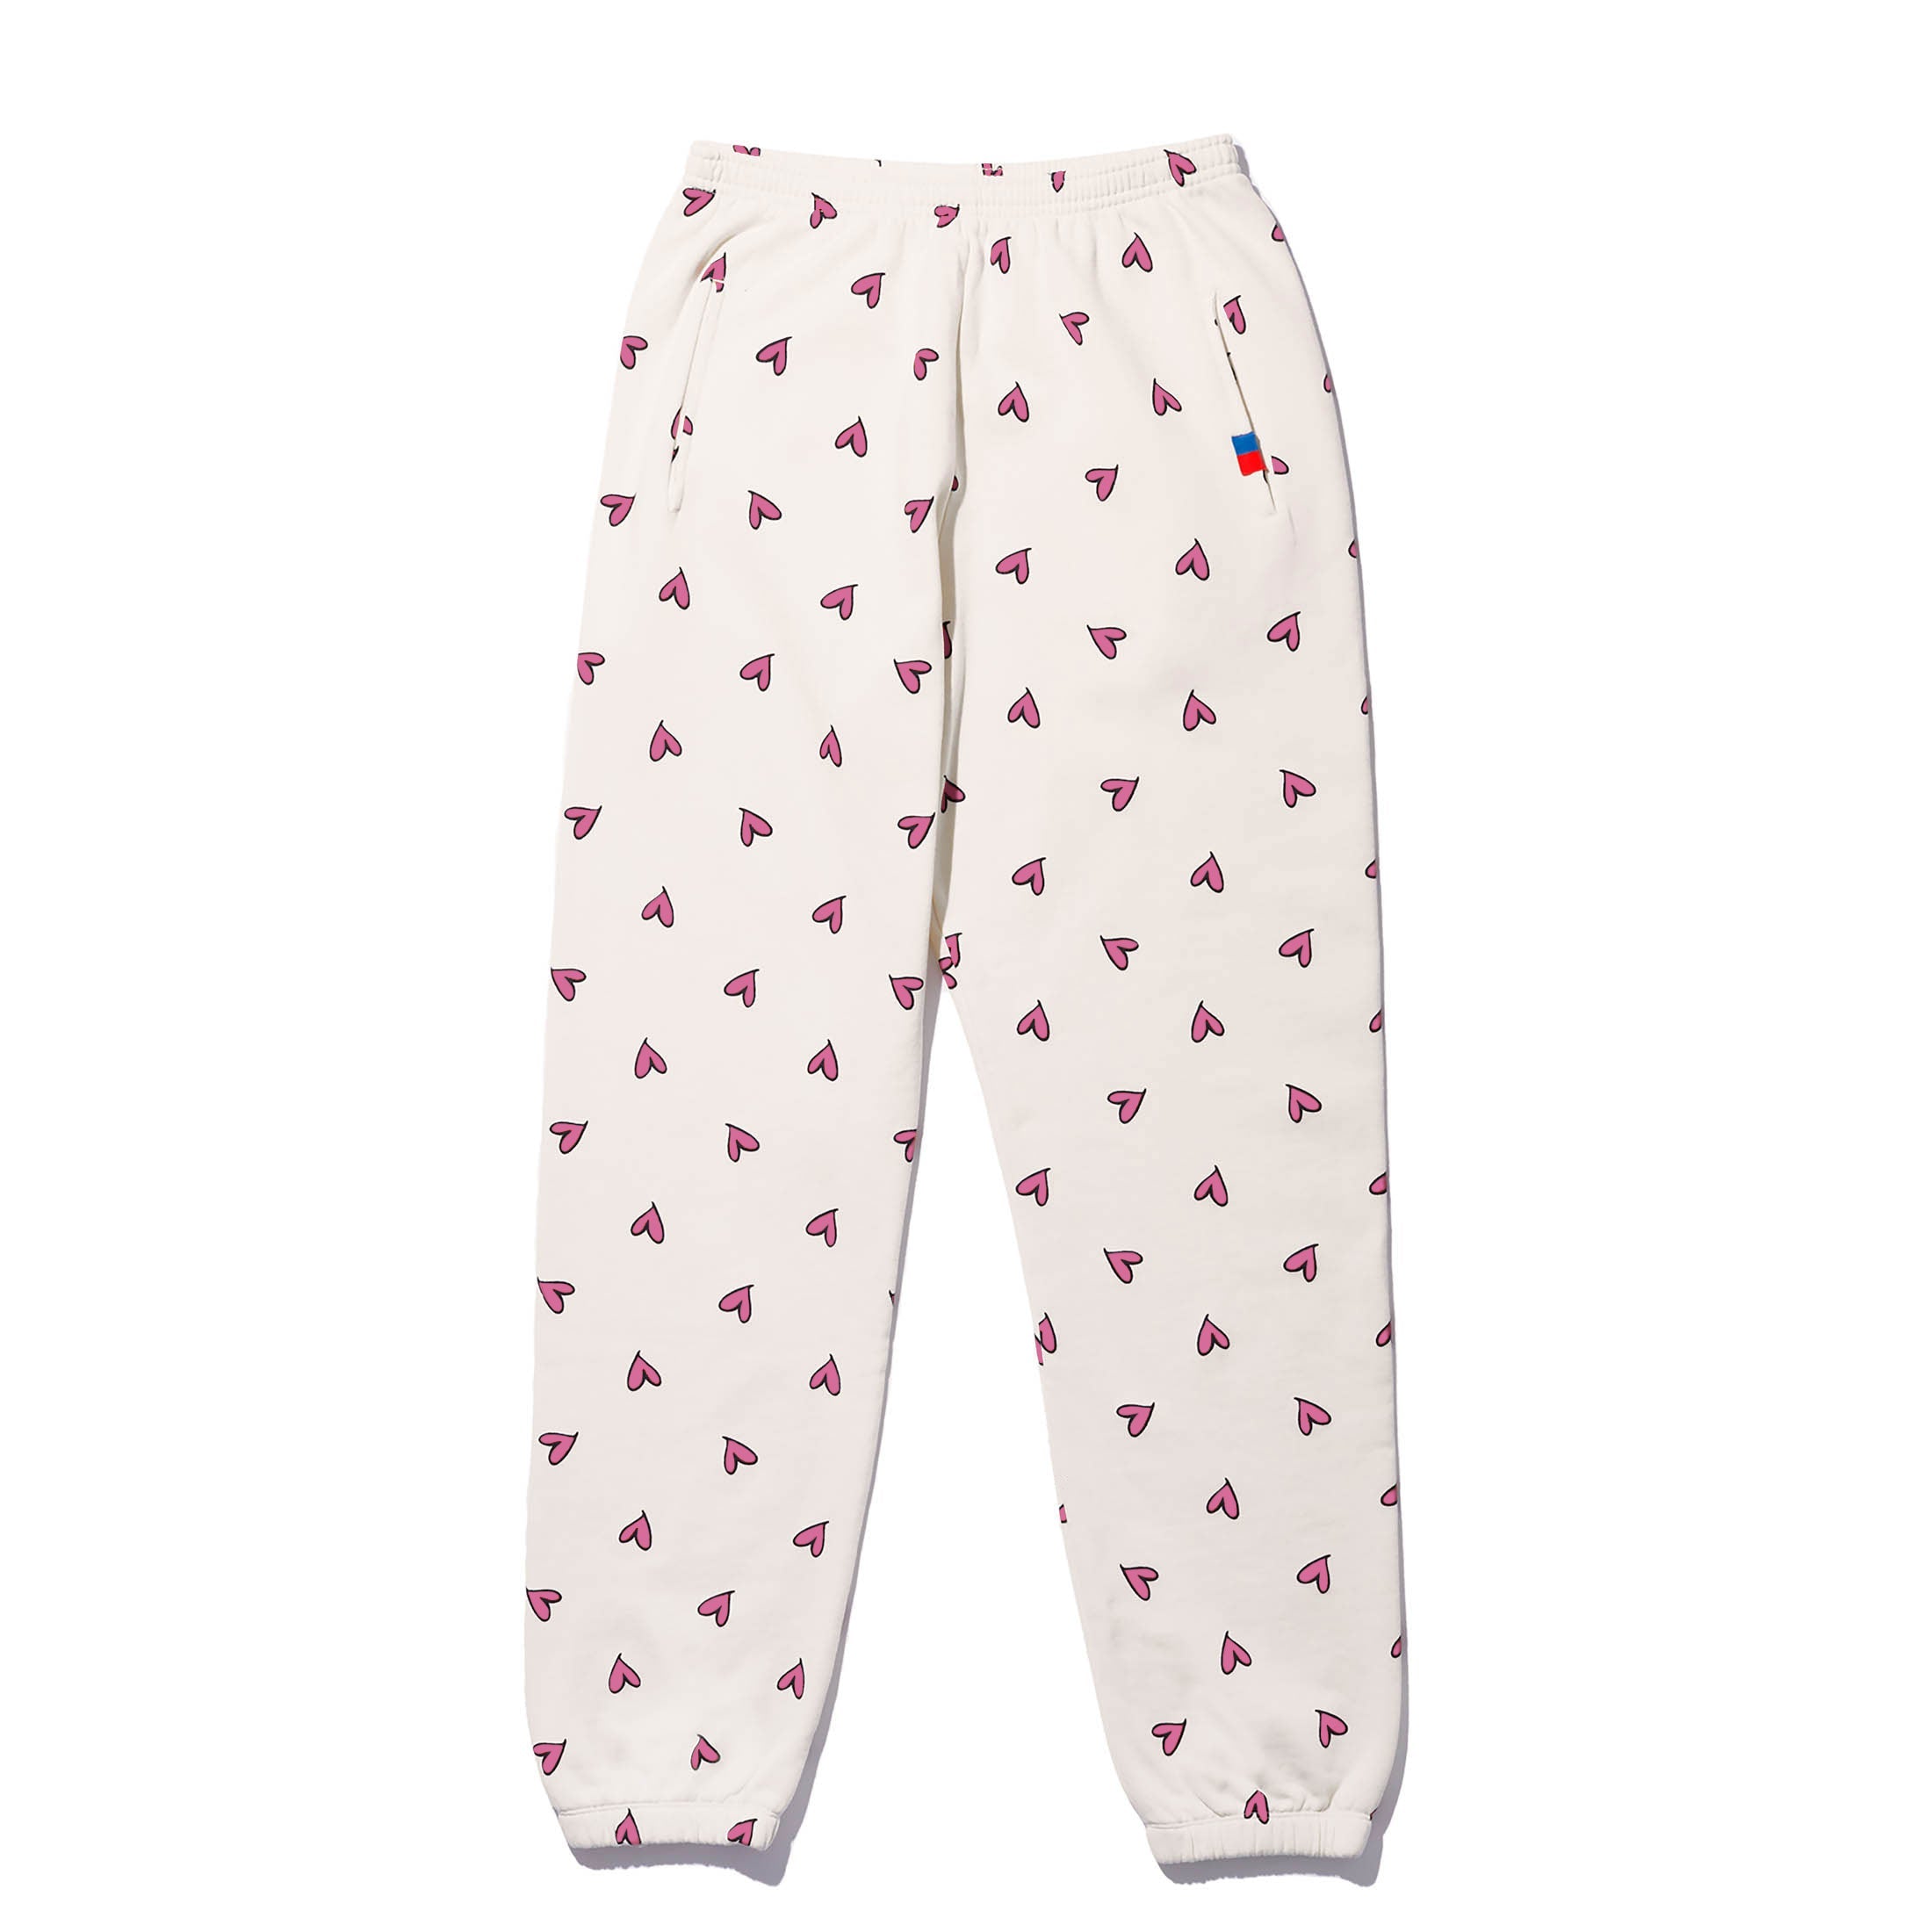 The All Over Heart Sweatpants - Cream/Pink